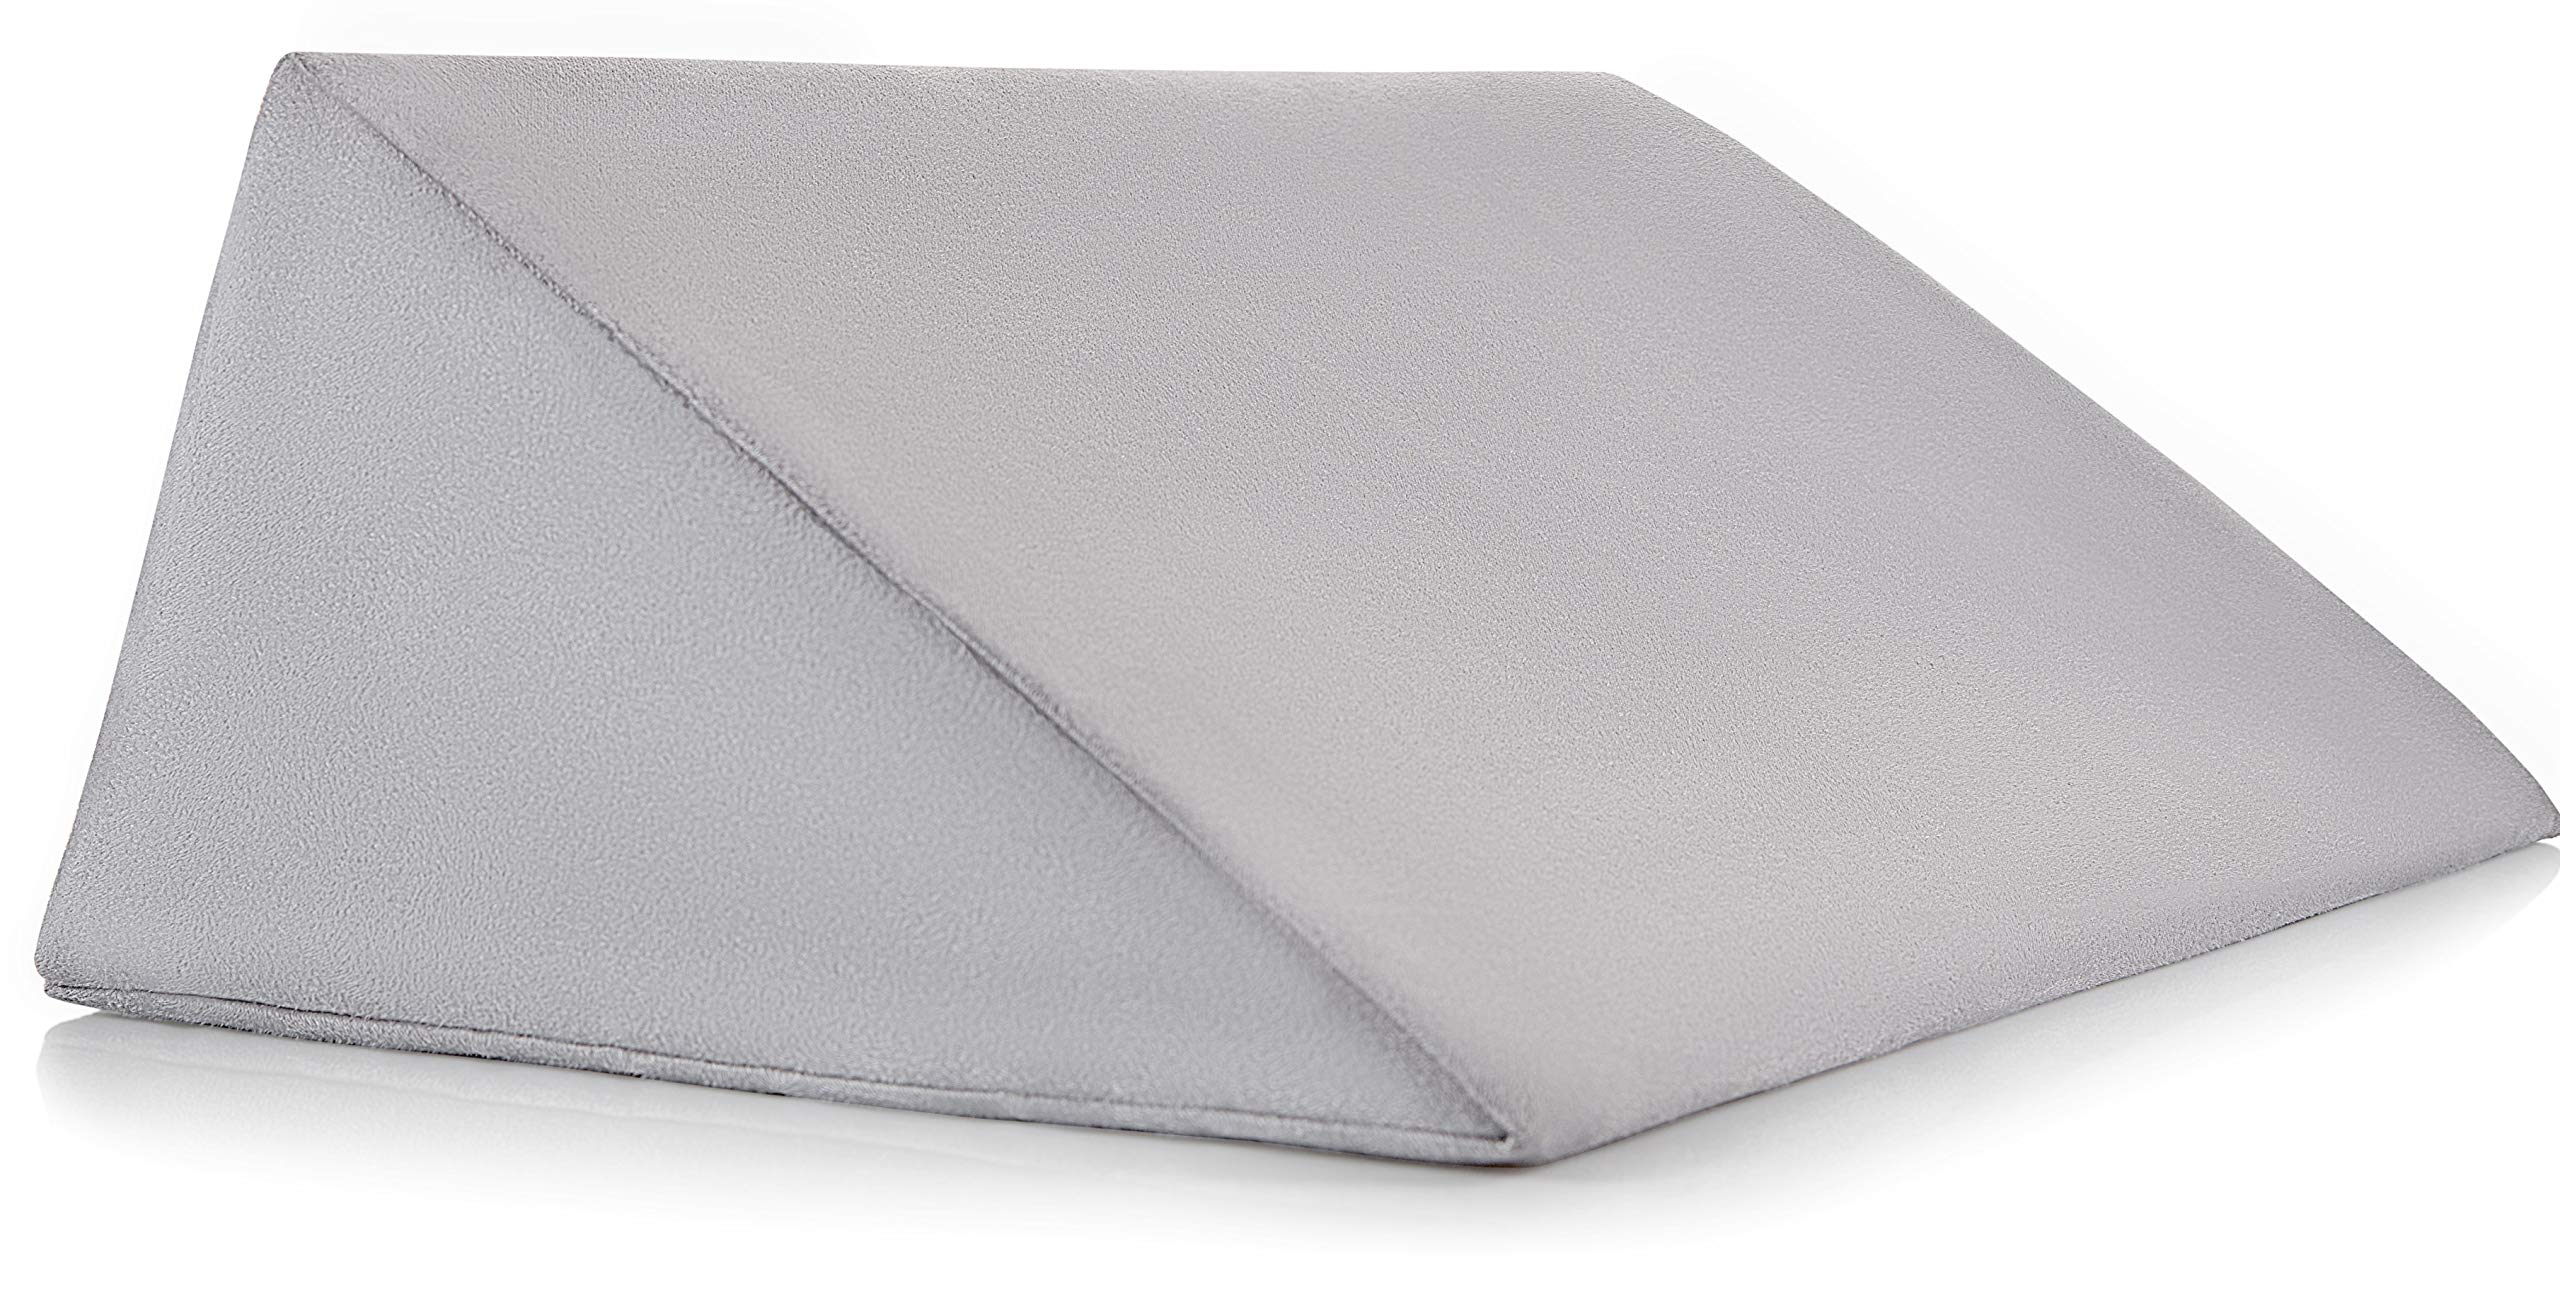 The Wedge Small Wedge Pillow Positioning Pillow Positioning Wedge Foam  Wedge Pregnancy Wedge Made in USA Medical Wedge Pillow Position Pillow Ramp  Pillow Tablet Pillow Knee Pillow Gray